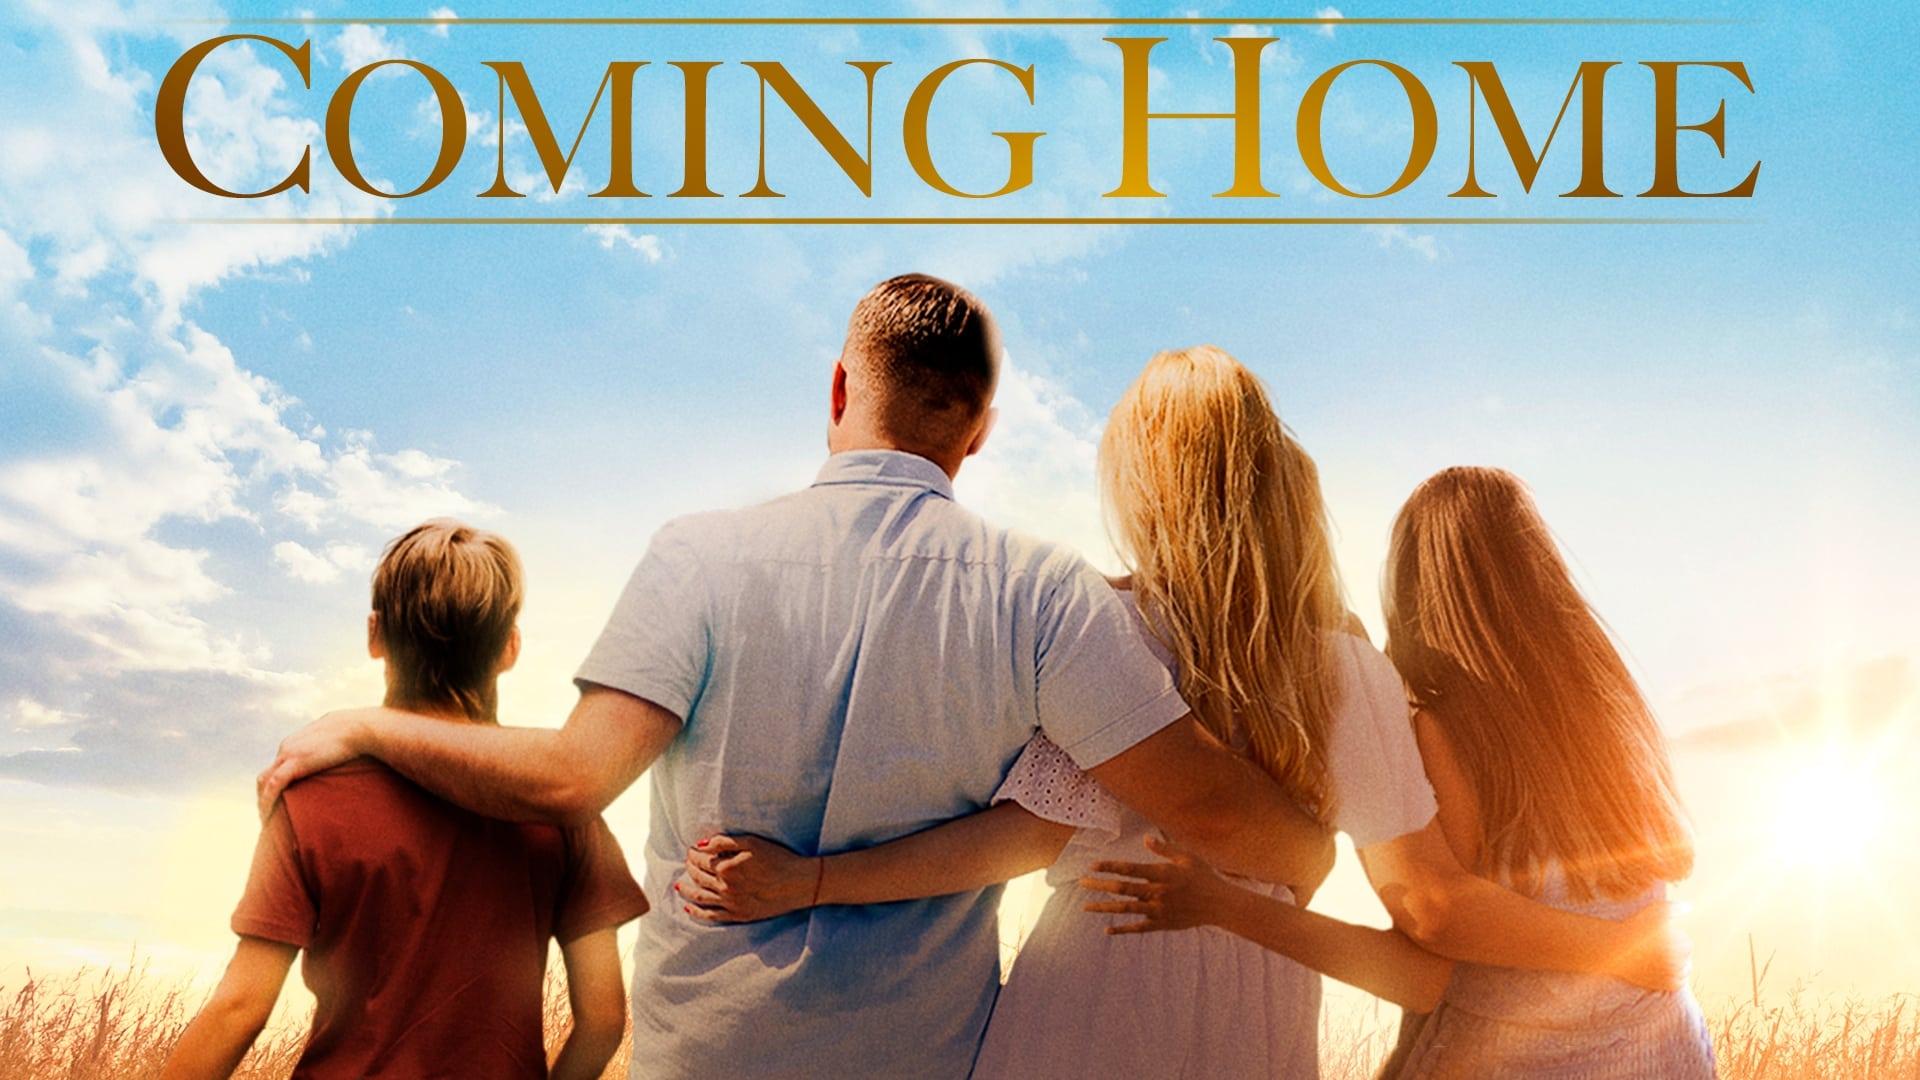 Coming Home backdrop